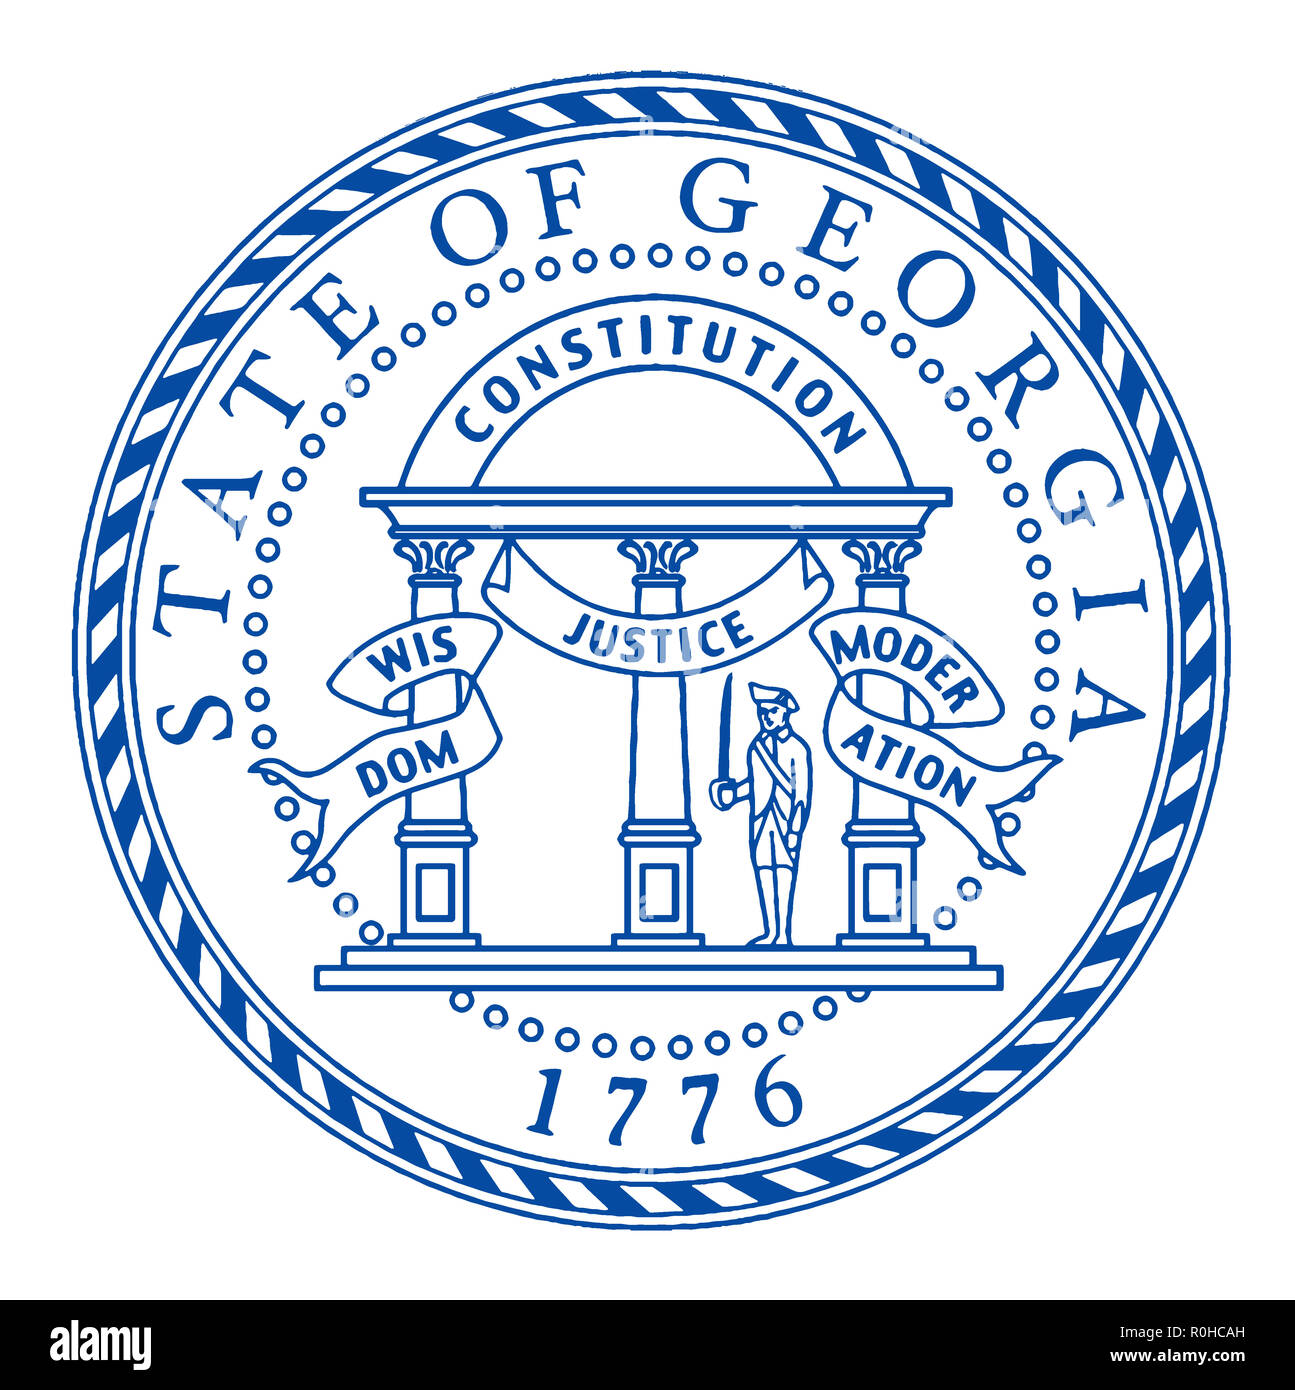 The State Seal of Georgia on a white background Stock Photo